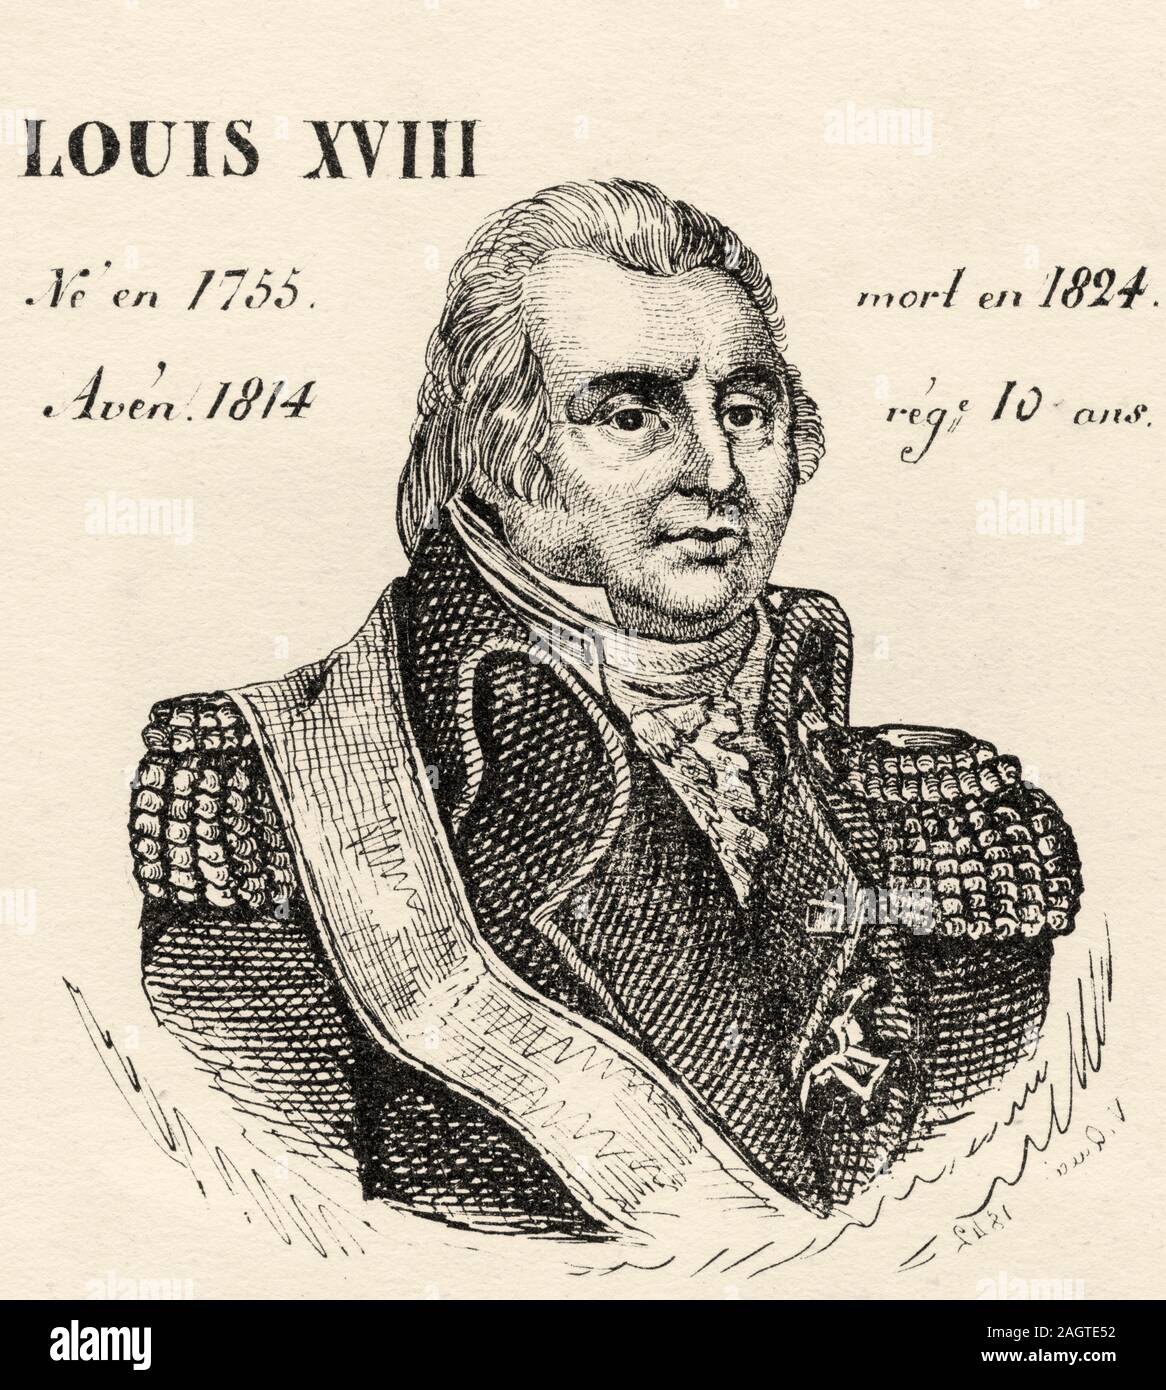 Portrait of Louis XVIII (1755 - 1824). King of France from 1814 to 1824. House of Bourbon. History of France, from the book Atlas de la France 1842 Stock Photo